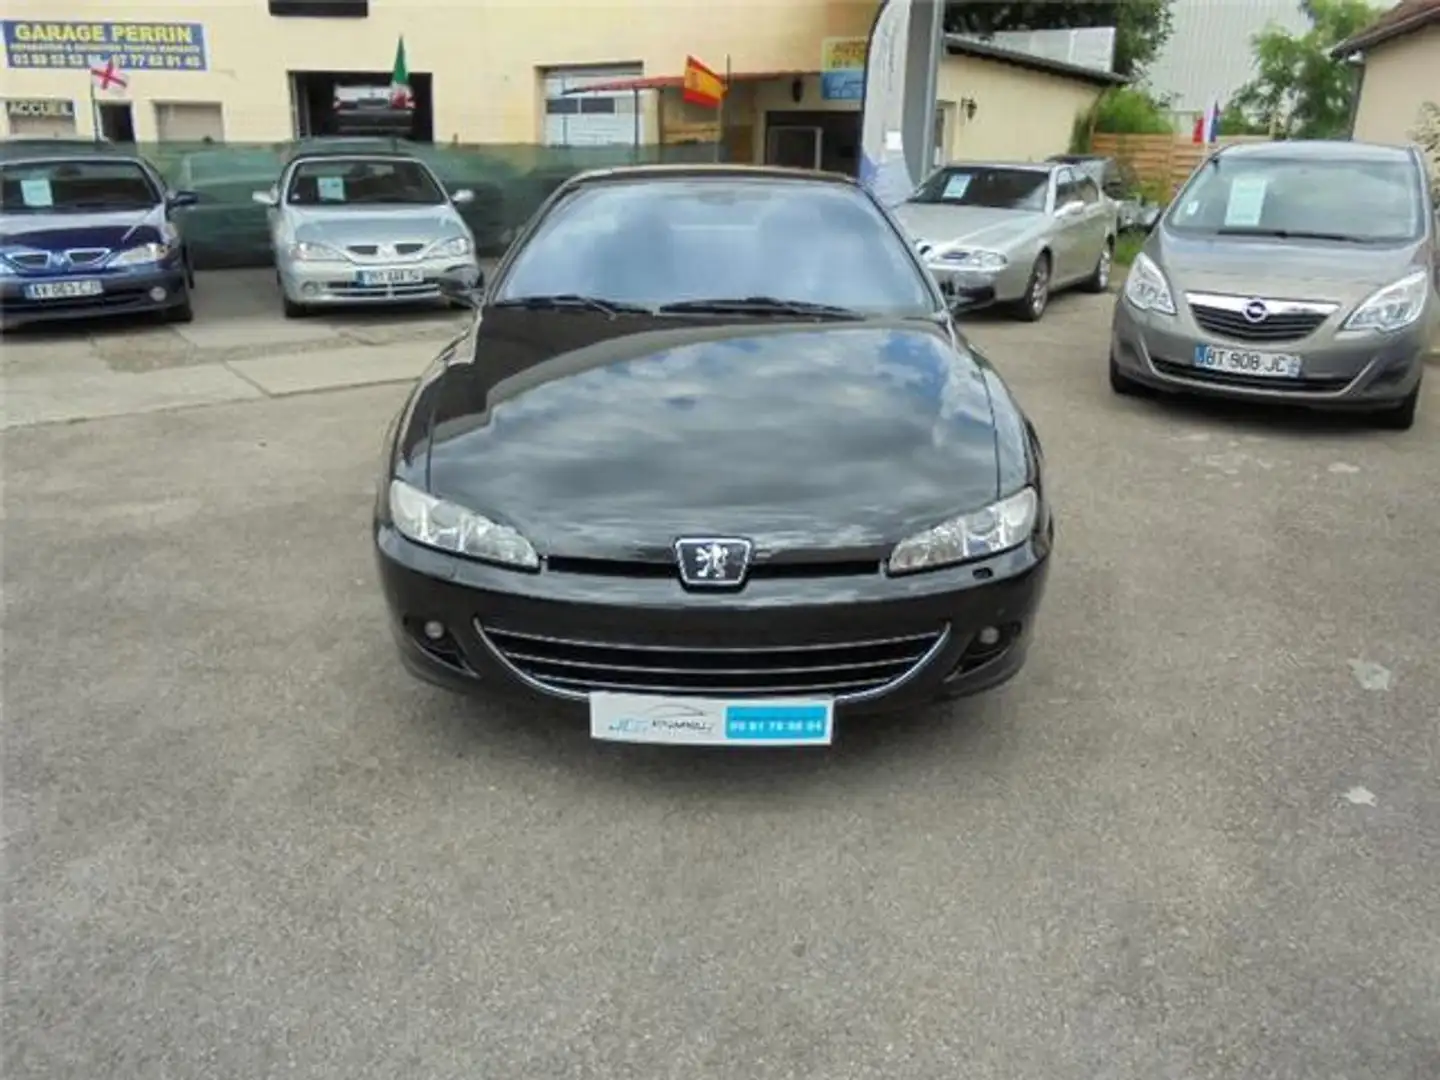 Peugeot 406 COUPE 2.2 HDI136 GRIFFE Schwarz - 2